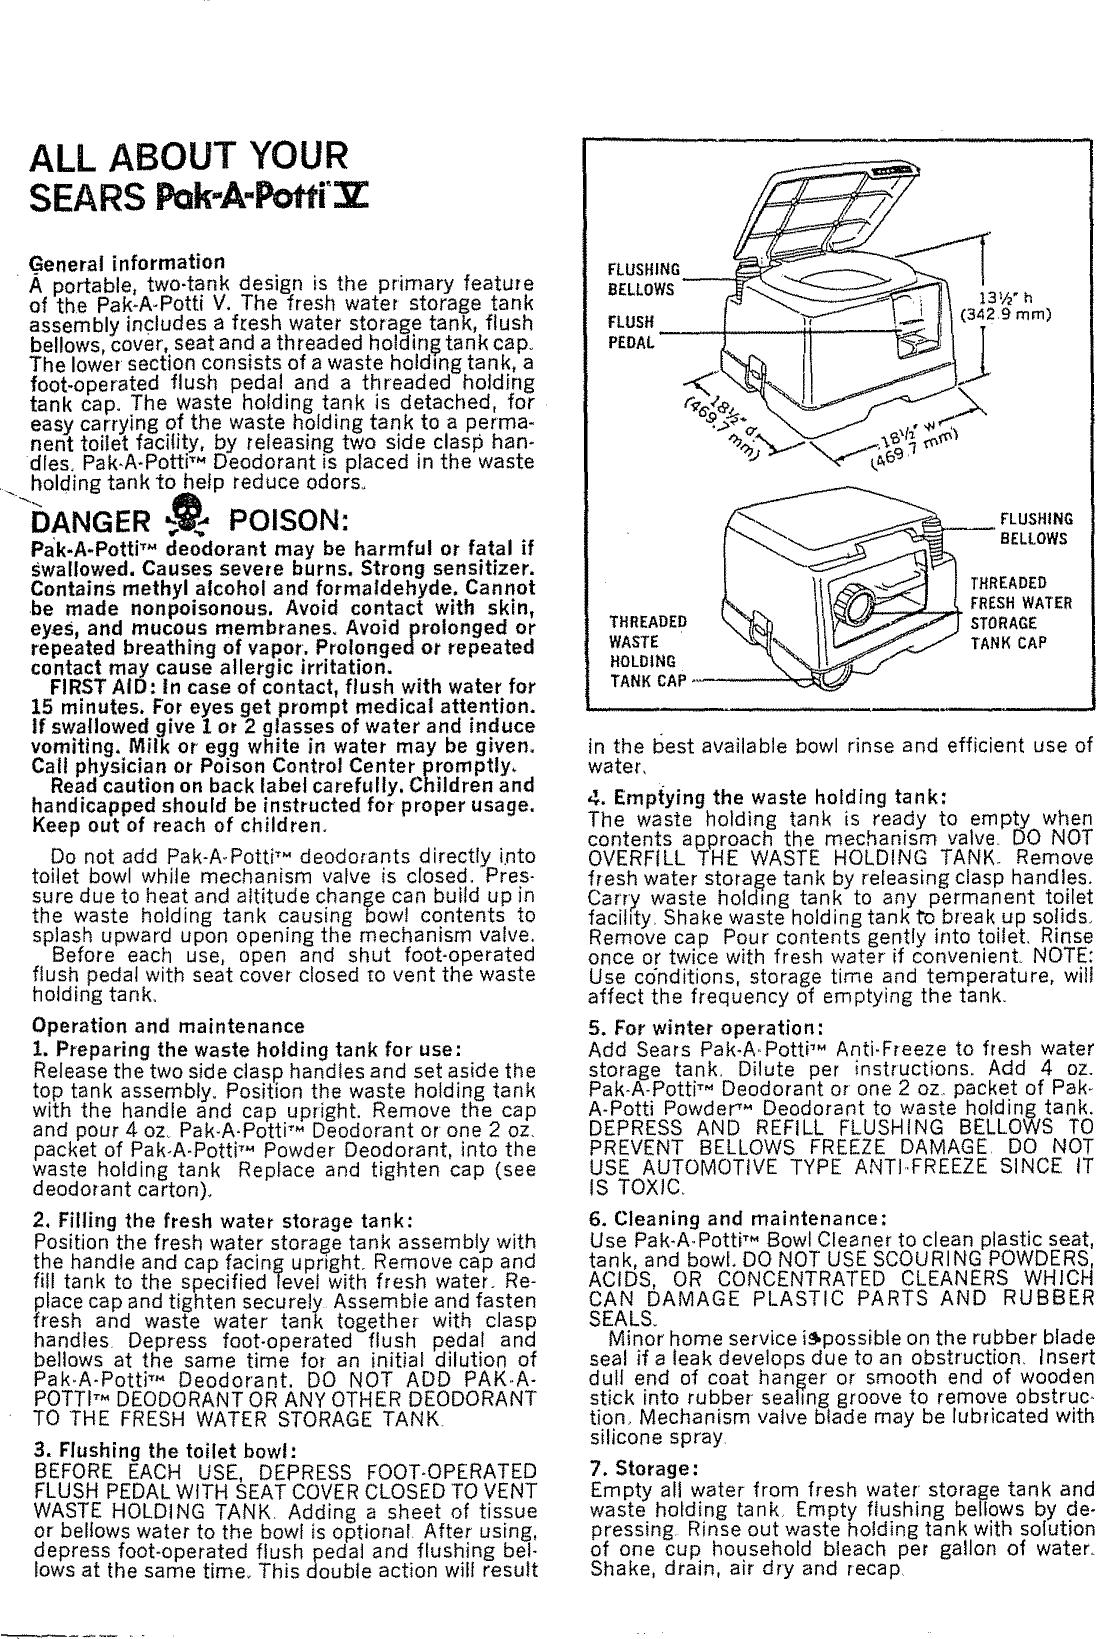 Page 2 of 4 - Sears 25973551-100 L0911520 User Manual  PAK-A-POTTI V PORTABLE TOILET - Manuals And Guides